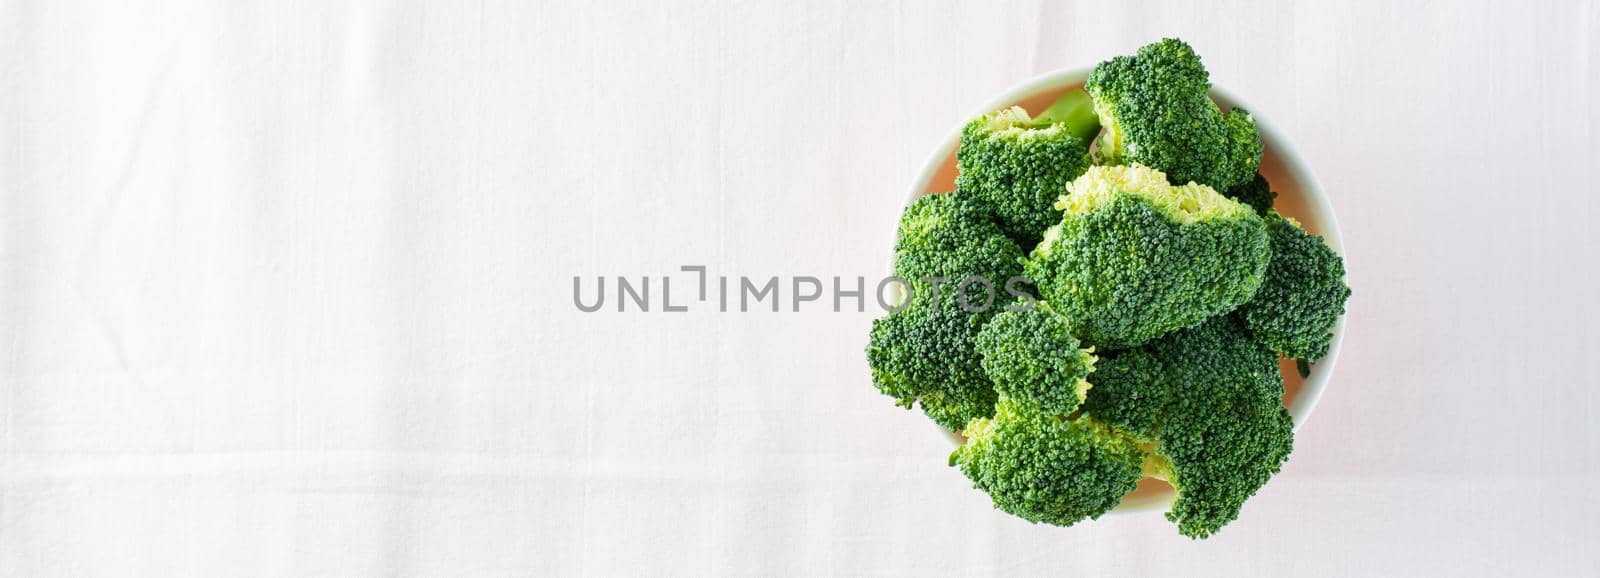 Fresh broccoli in a bowl on a table on a cloth. Diet healthy food. Top view. Copy space. Web banner by Aleruana